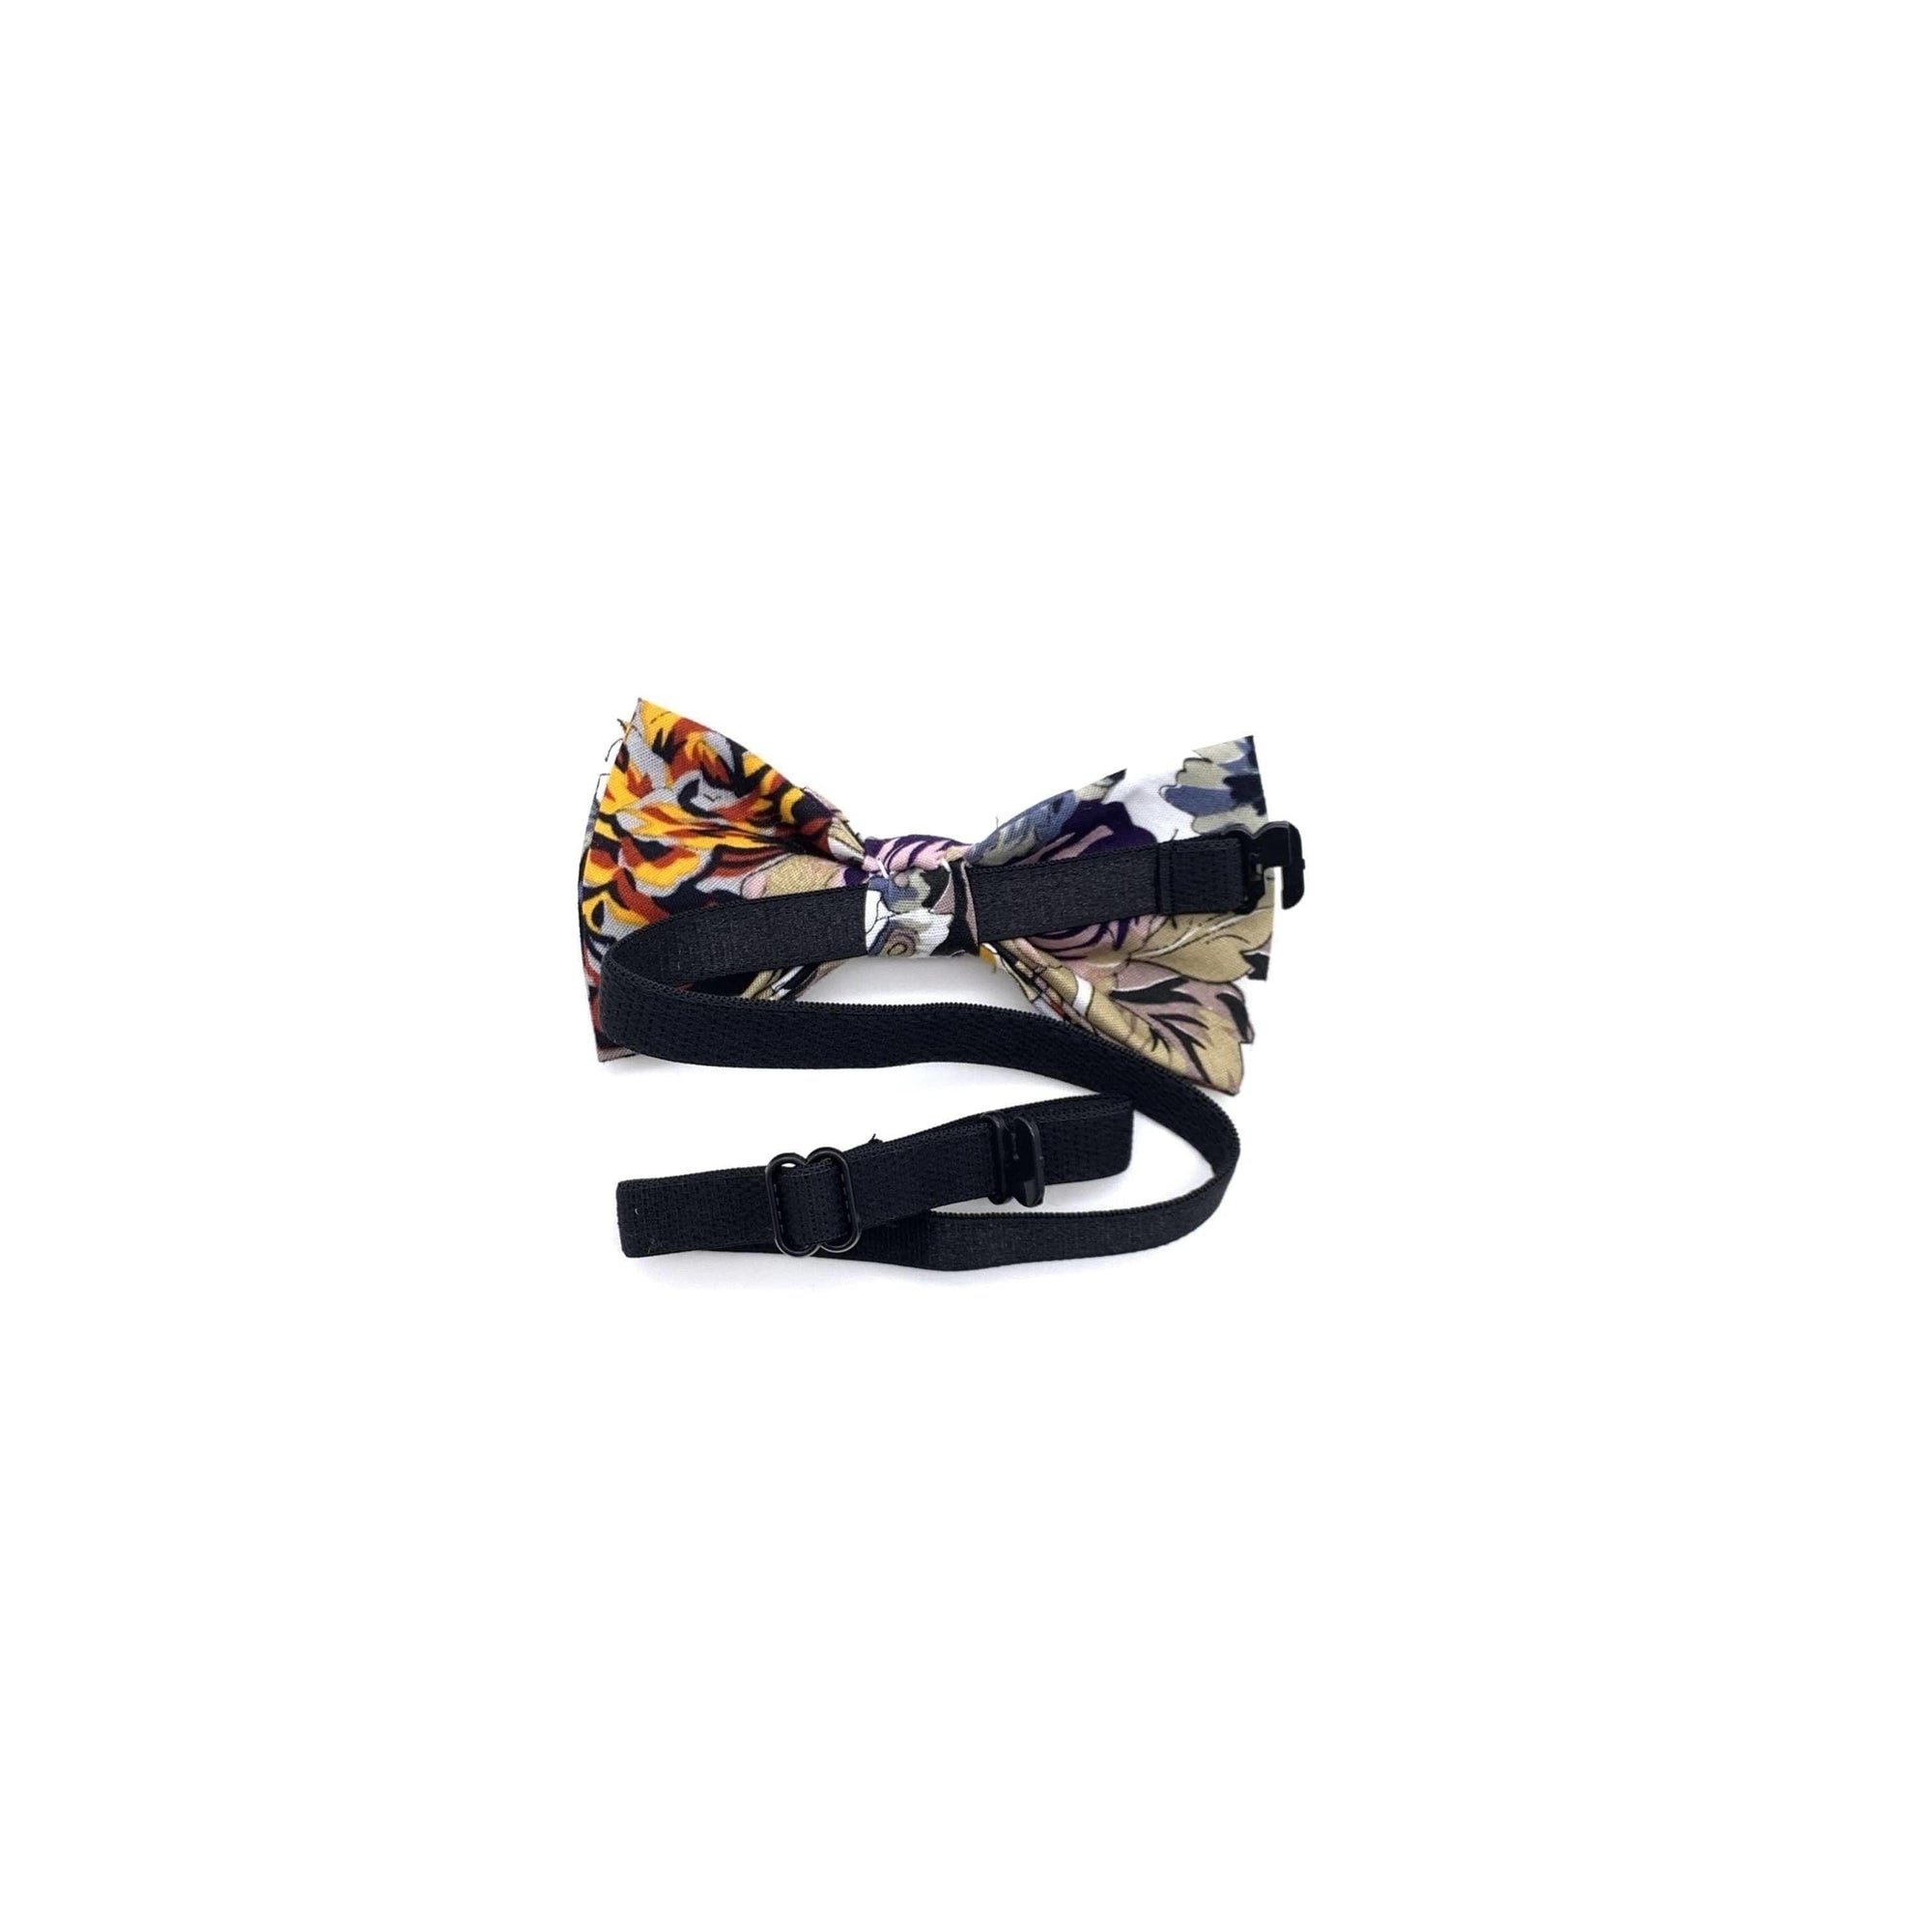 DUKE Kids Floral Pre-Tied Bow Tie-DUKE Kids Floral Pre-Tied Bow Tie Strap is adjustablePre-Tied bowtieBow Tie 10.5 * 6CM Base is White Great for: Weddings styled shoots groomsmen gifts prom formal events-Mytieshop